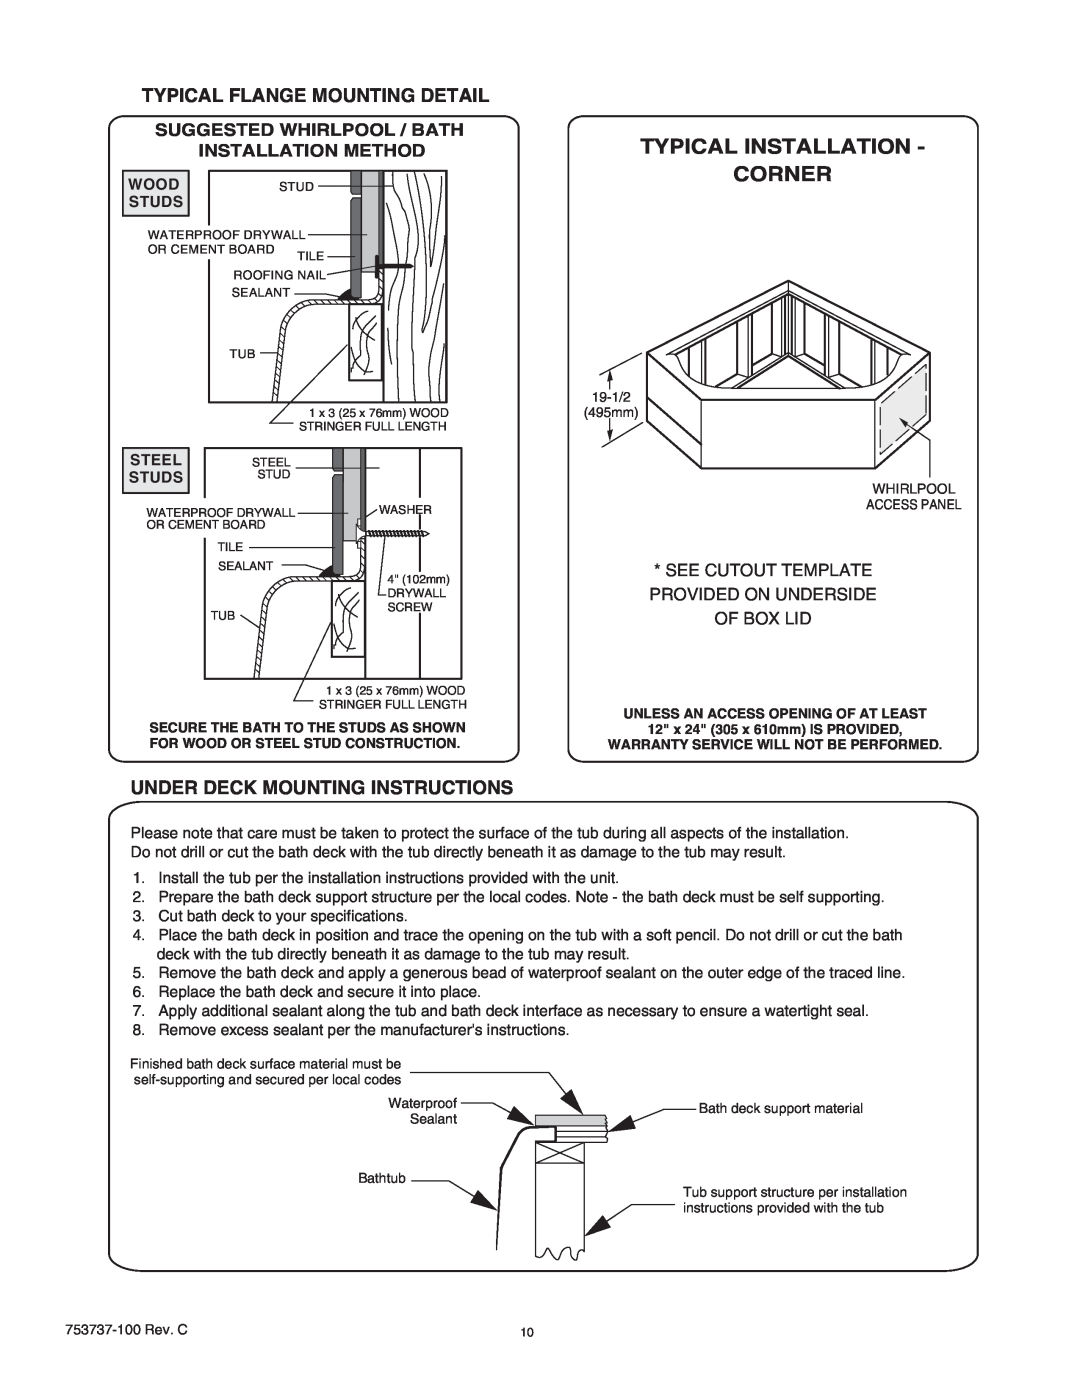 American Standard 6060L / V Typical Installation Corner, Typical Flange Mounting Detail, Under Deck Mounting Instructions 